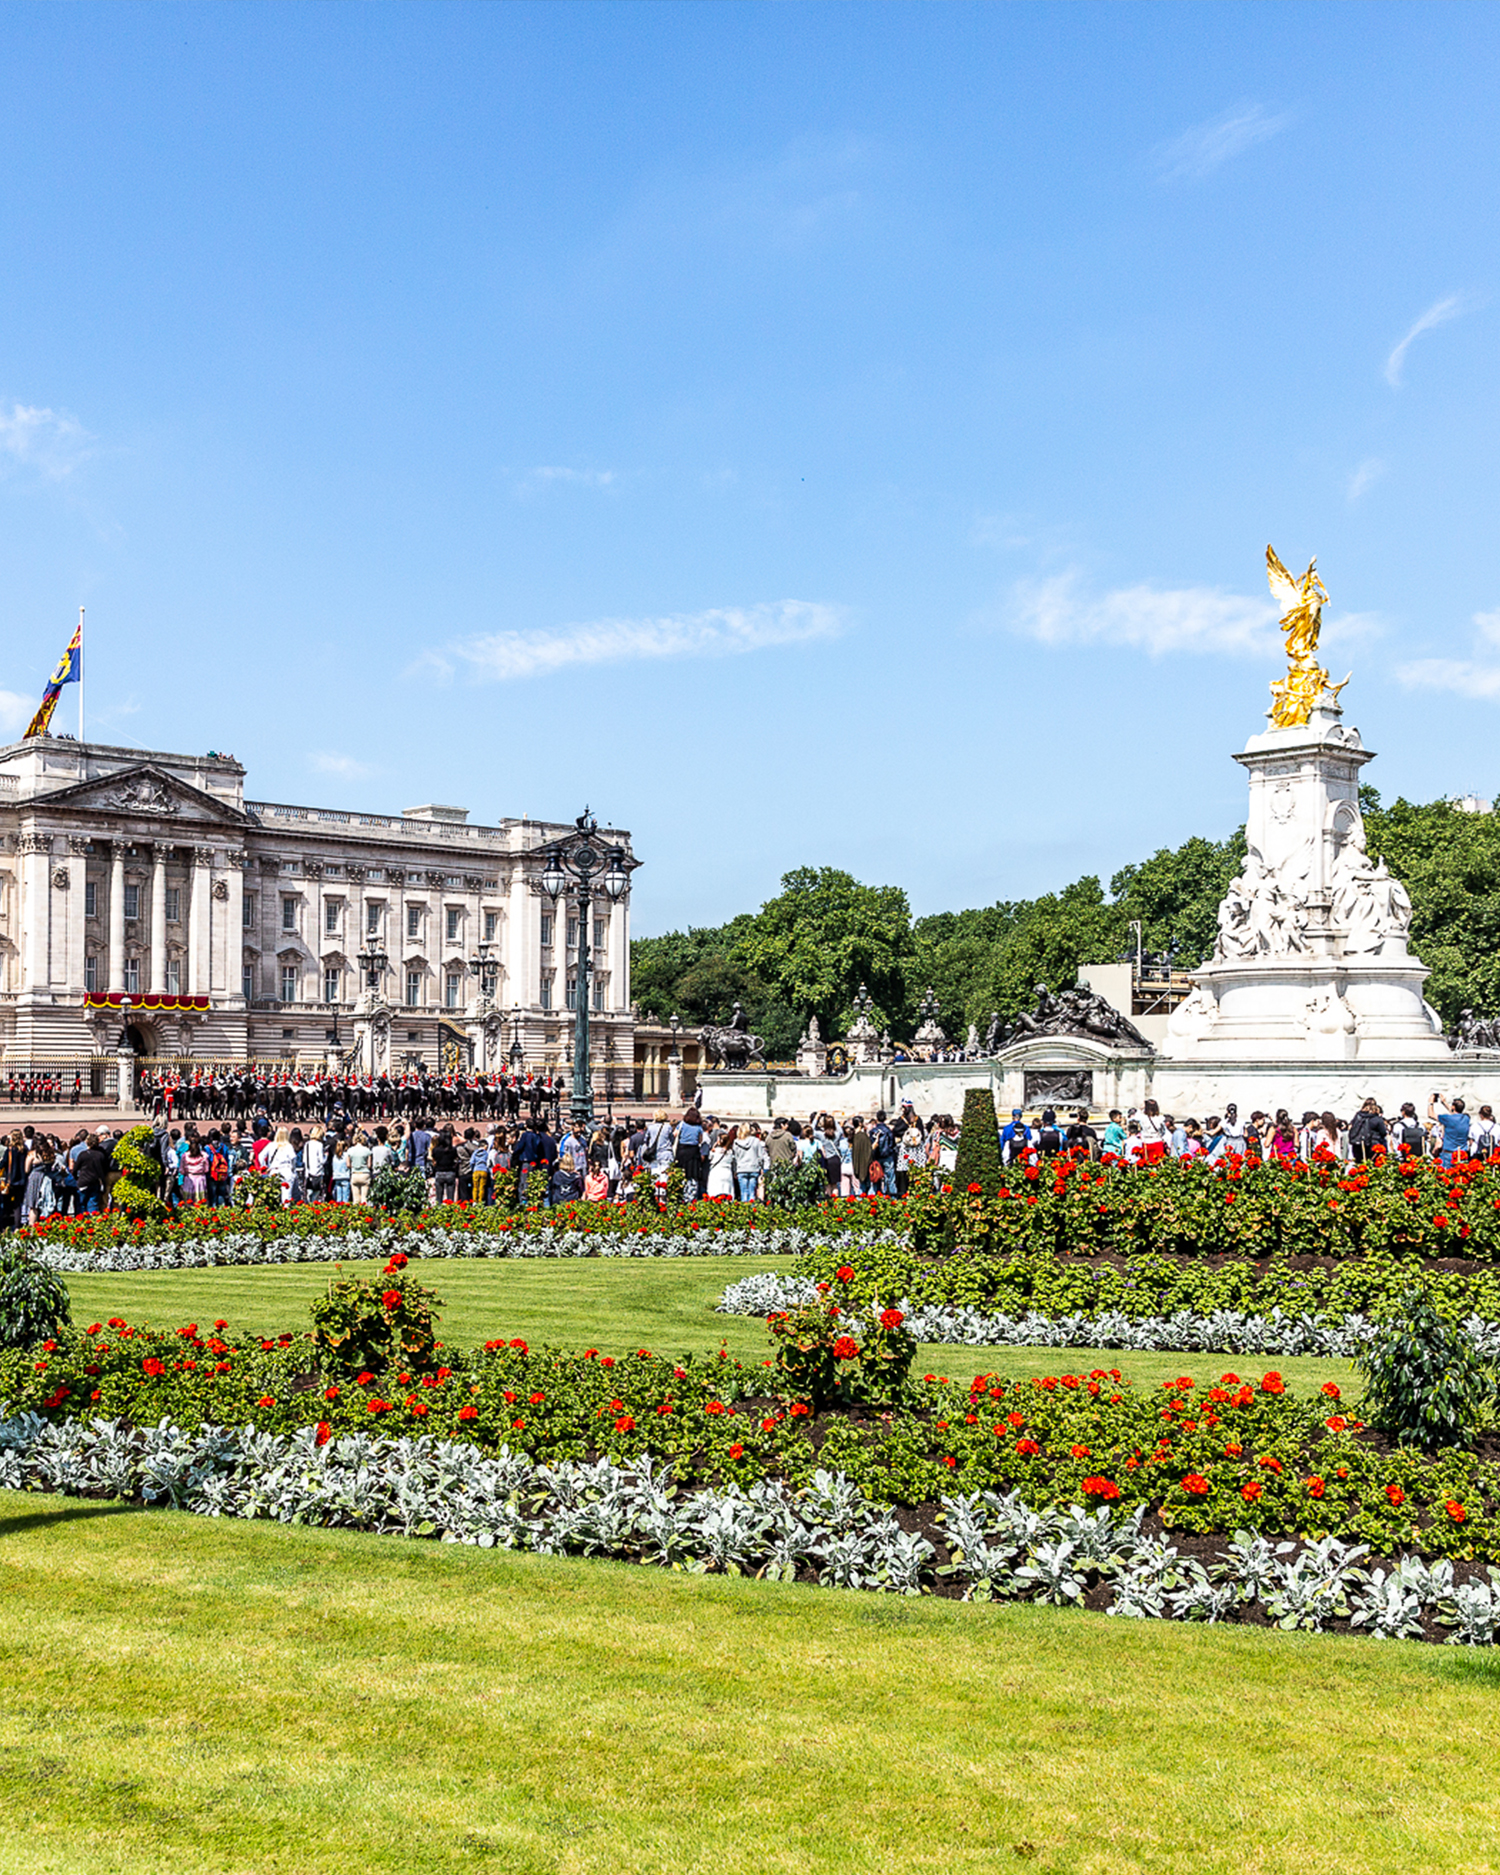 Buckingham Palace and Queen Victoria Memorial